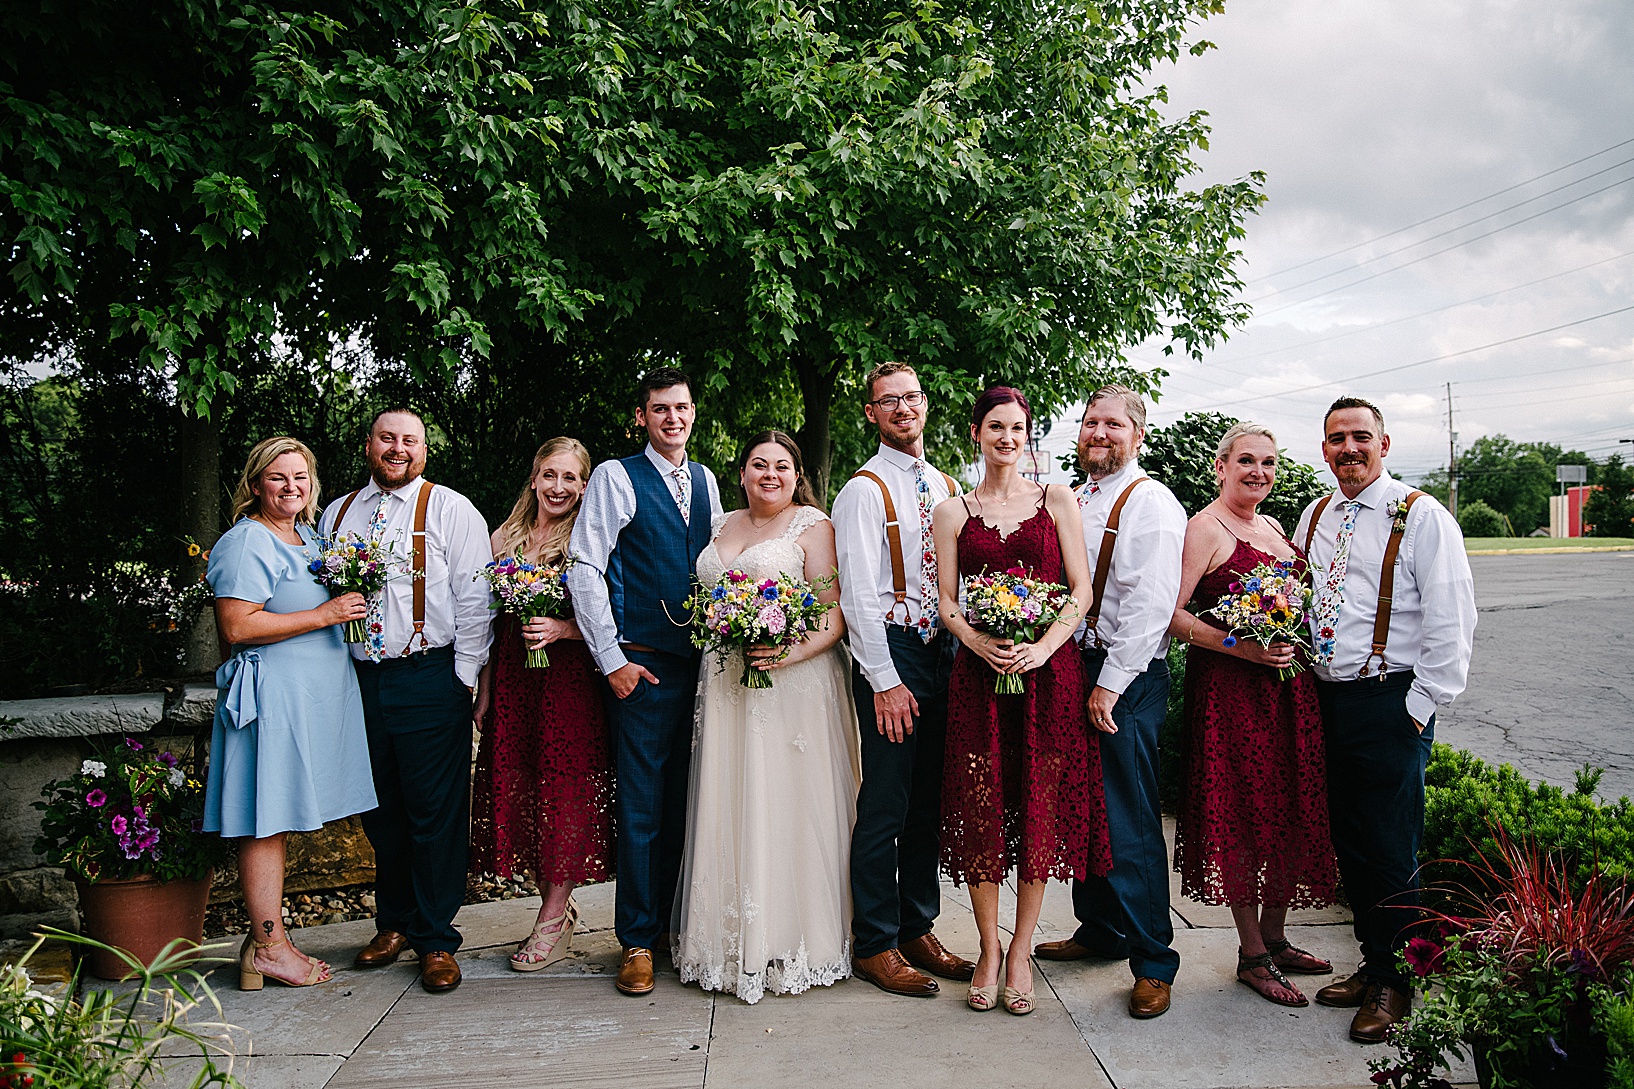 The whole wedding party lined up and posing for the camera with groom and bride in the middle